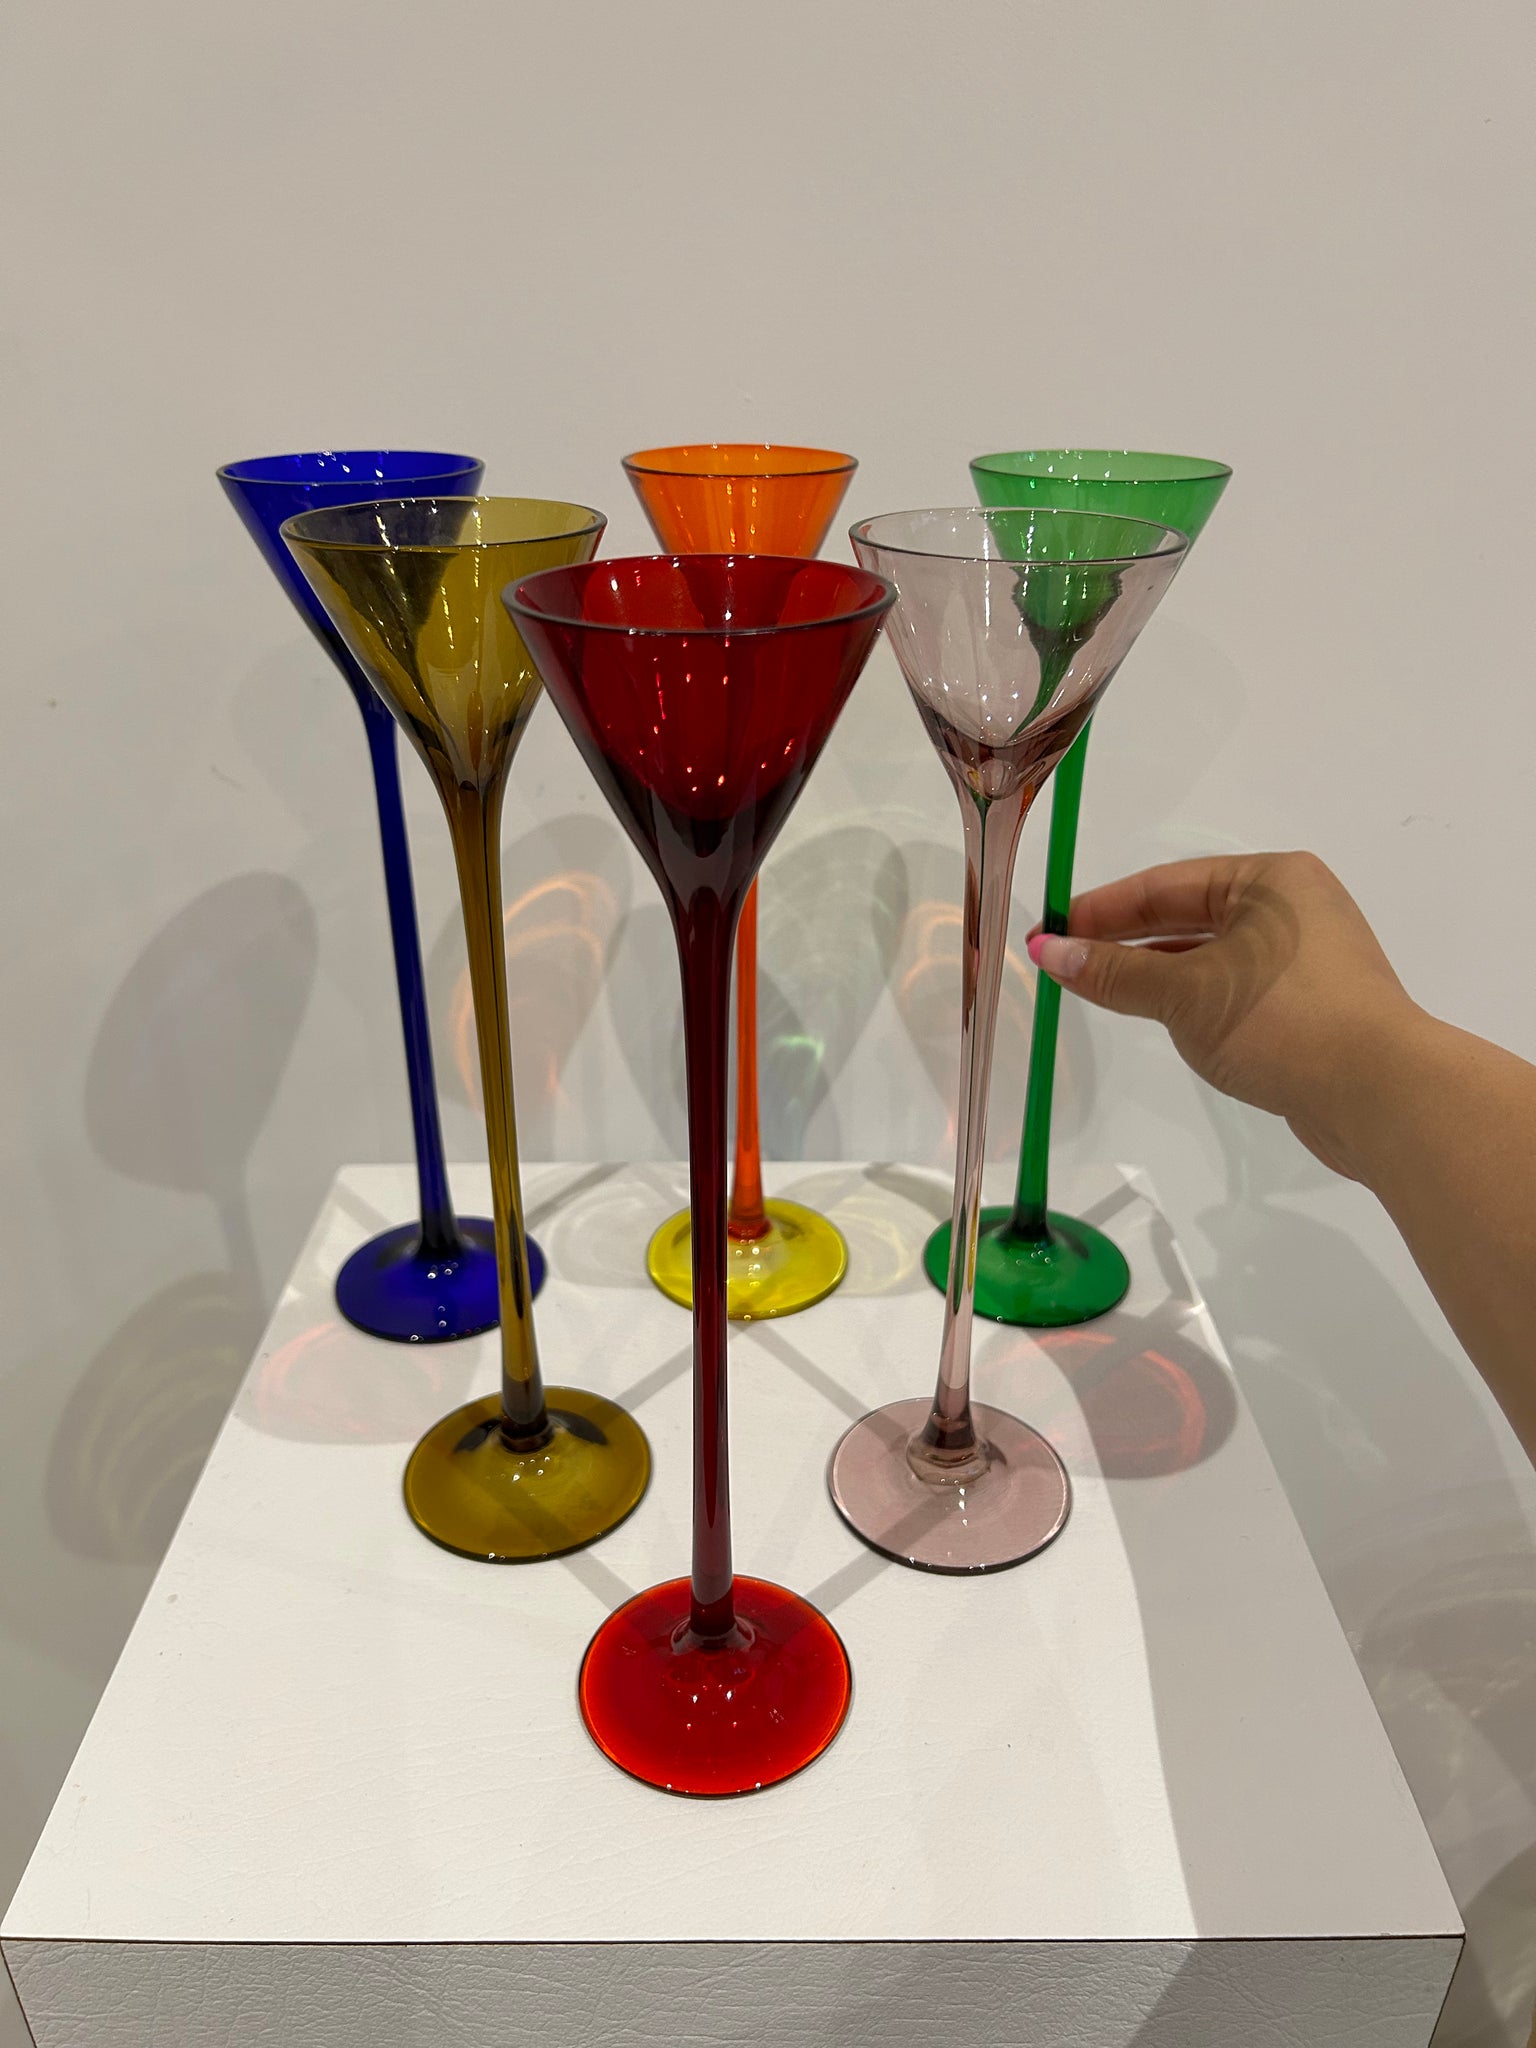 Selection of colorful glassware part 1